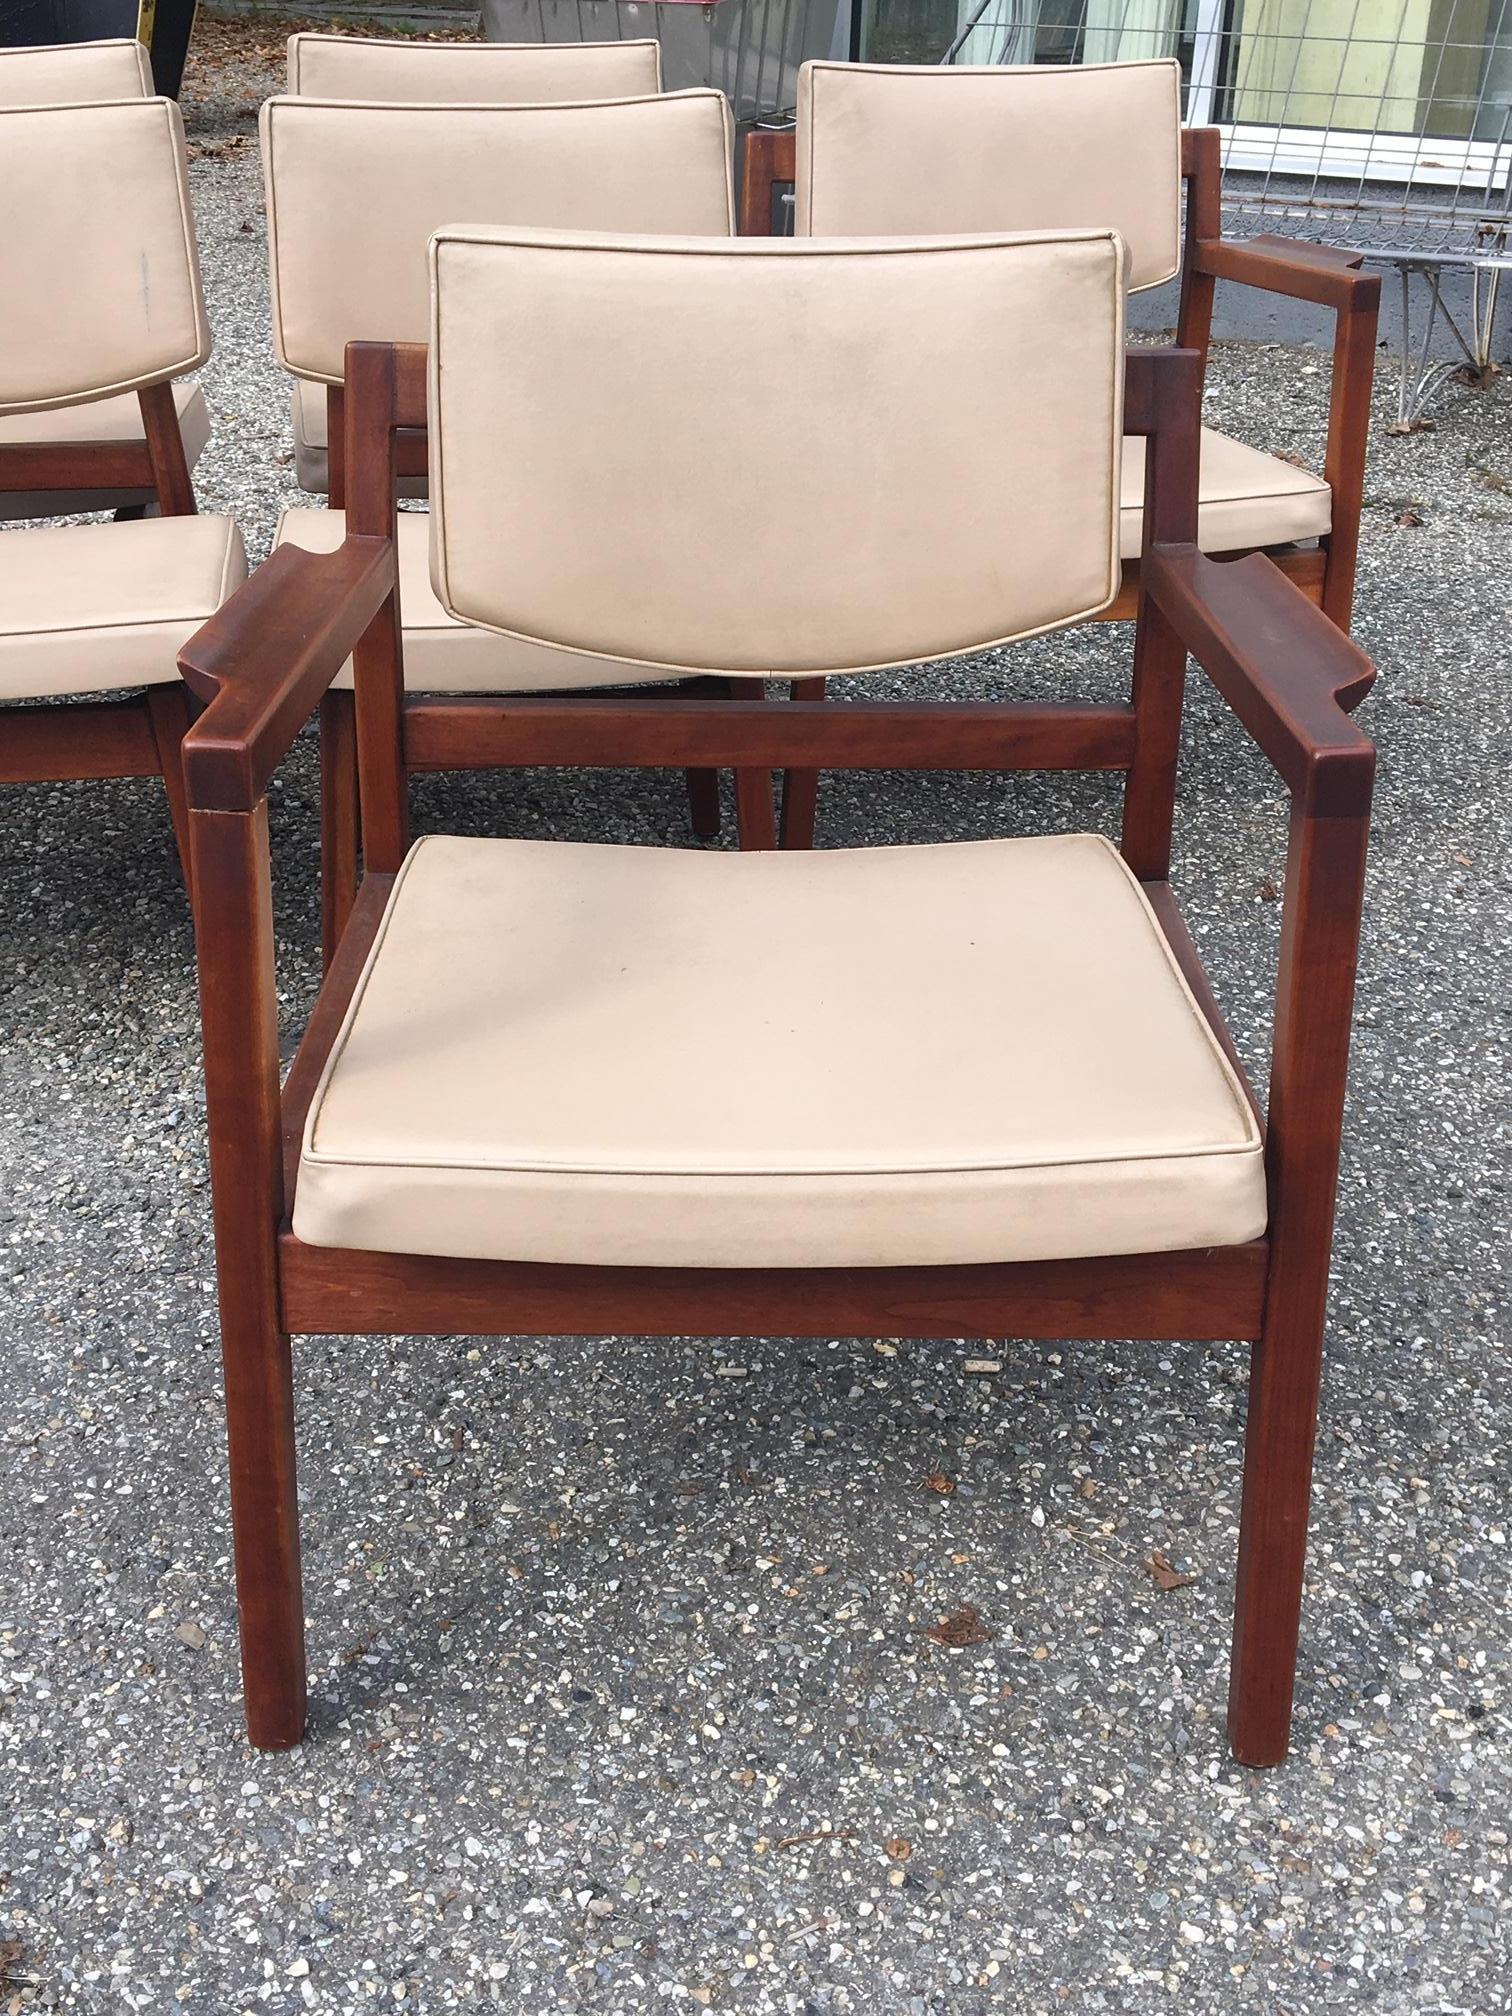 Rare set of eight (six sides and two armchairs) original Jens Risom dining chairs. Original stone color leather upholstery, original labels on each piece.

(large extension dining table, all original condition, also available)

Measurements are